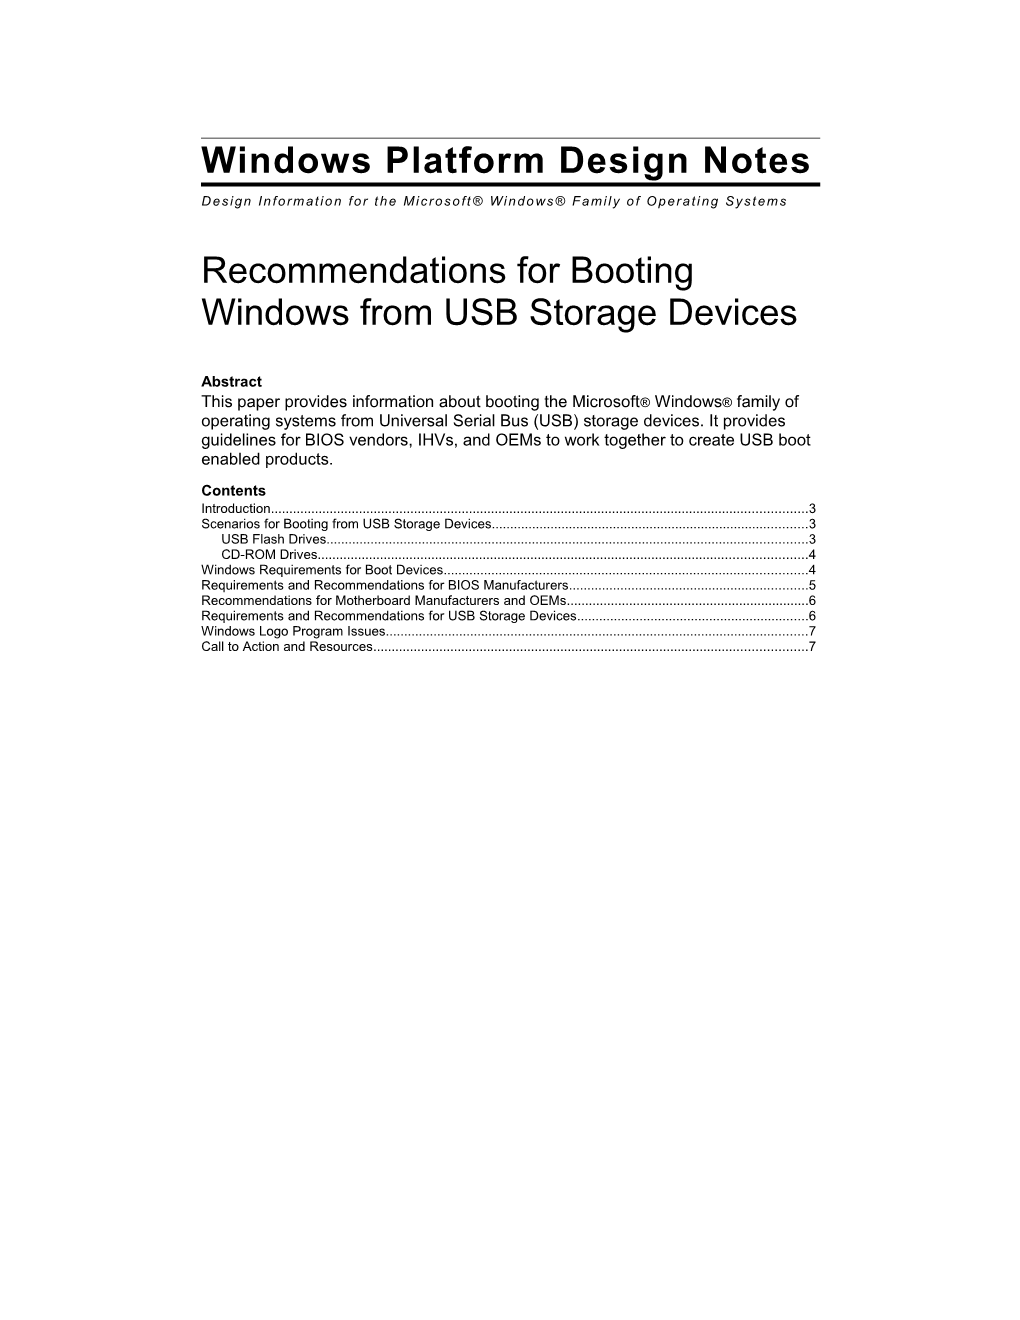 Recommendations for Booting Windows from USB Storage Devices